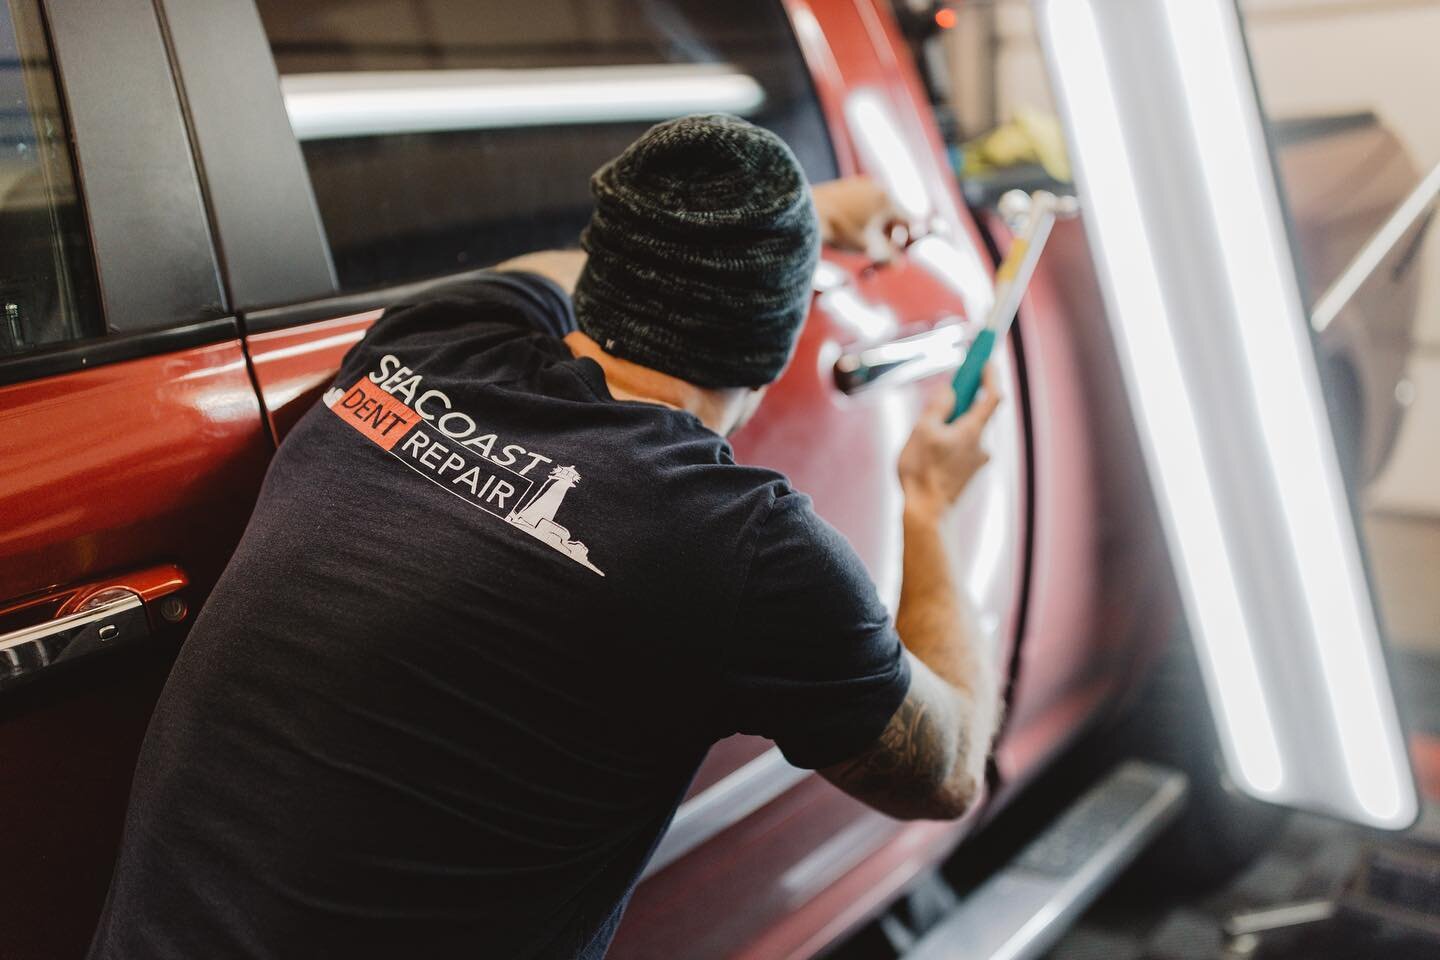 Hammering our way through another busy week of dents. Spring is around the corner ☀️